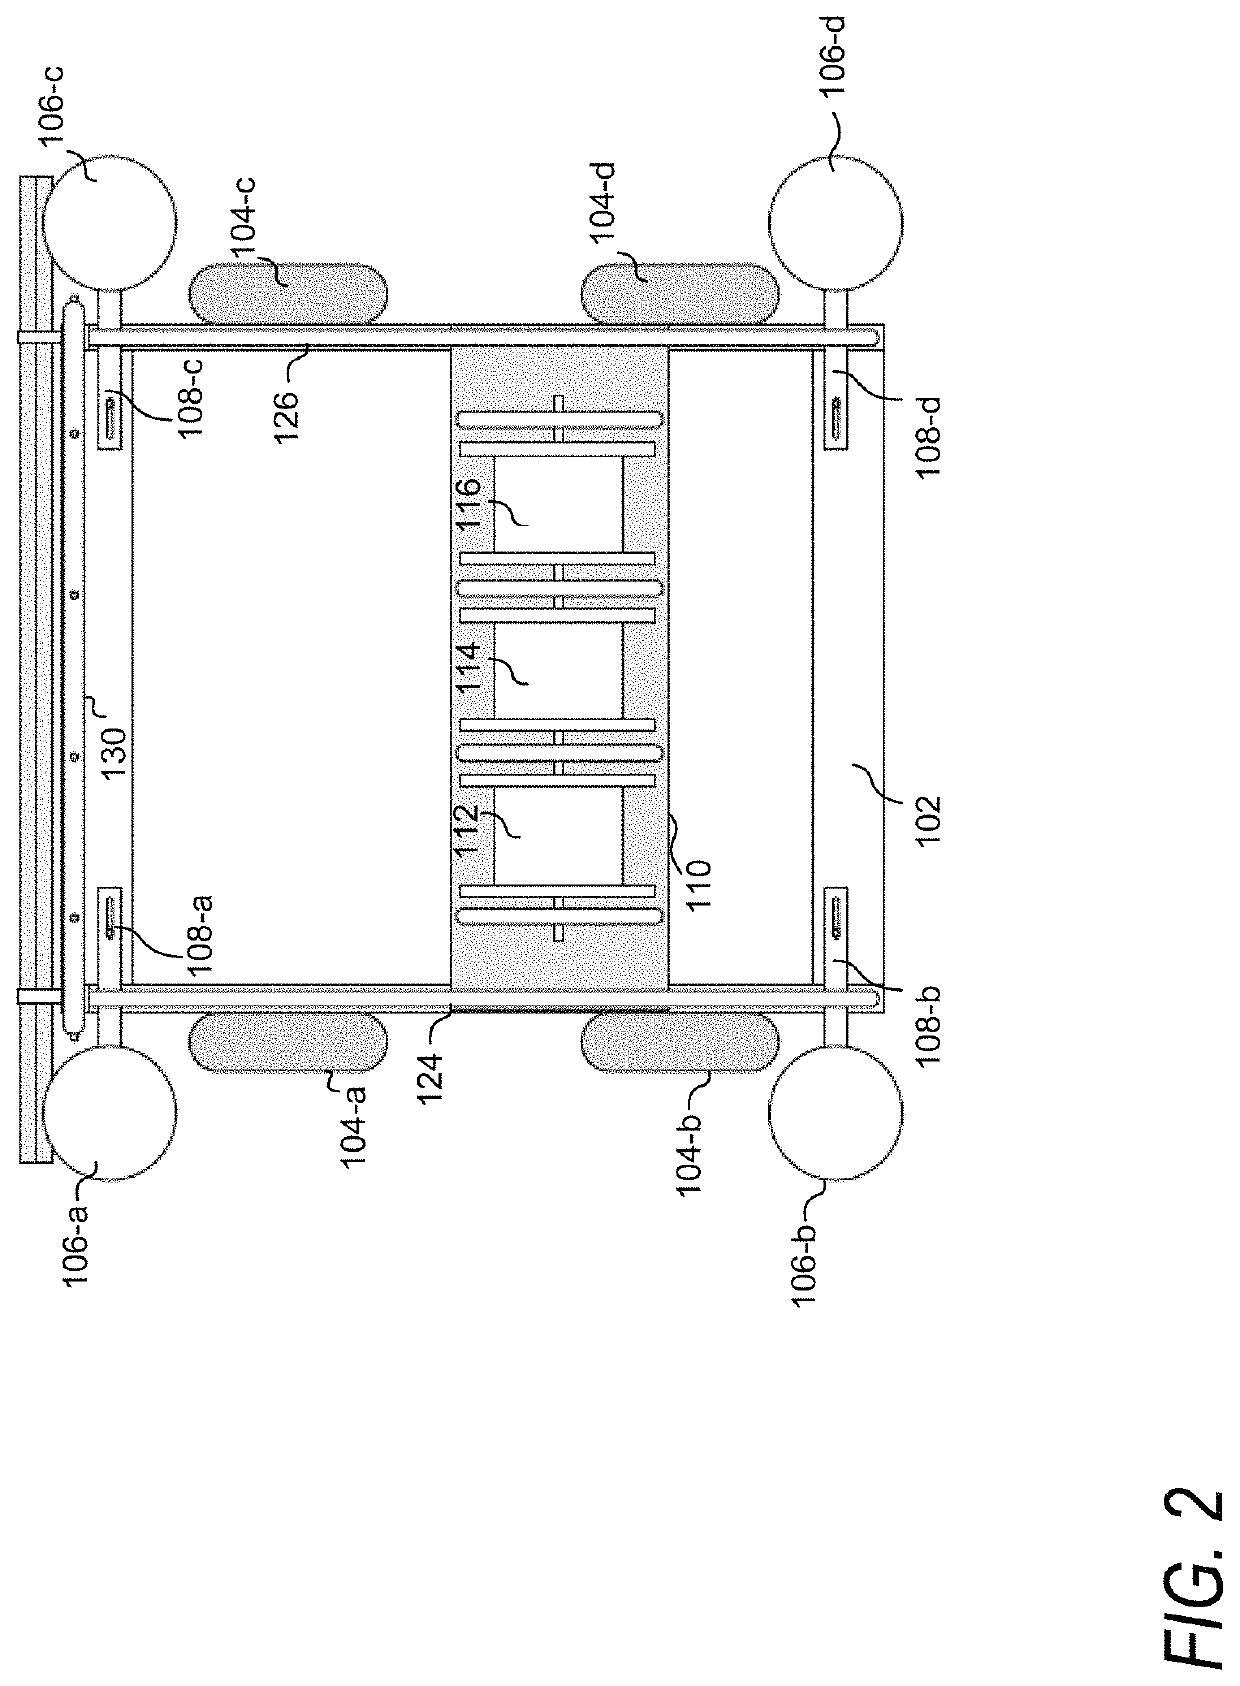 System and method for cleaning and sanitizing the interior of a freight container